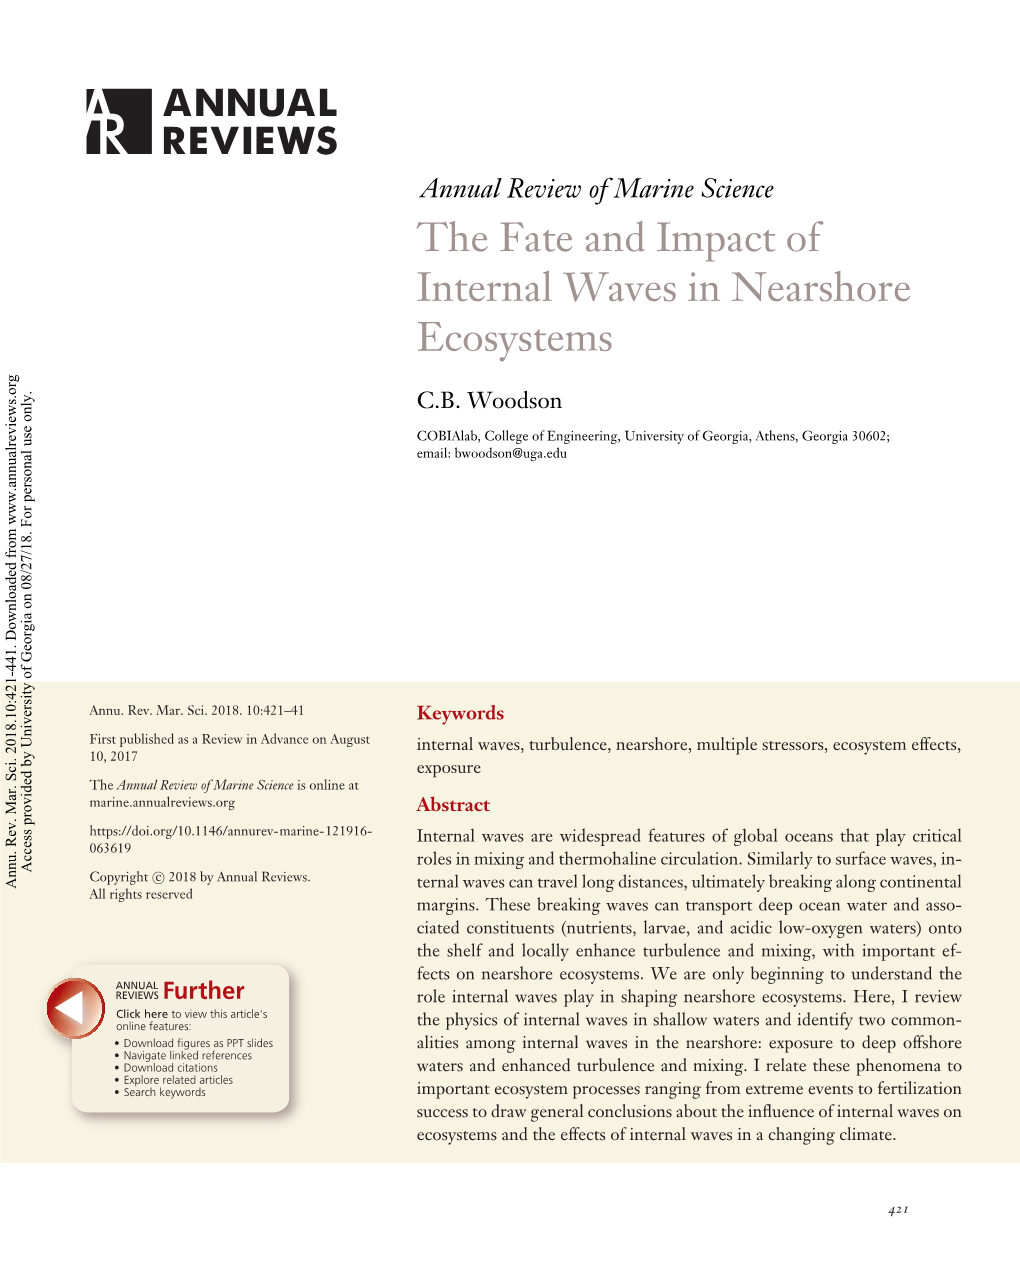 The Fate and Impact of Internal Waves in Nearshore Ecosystems